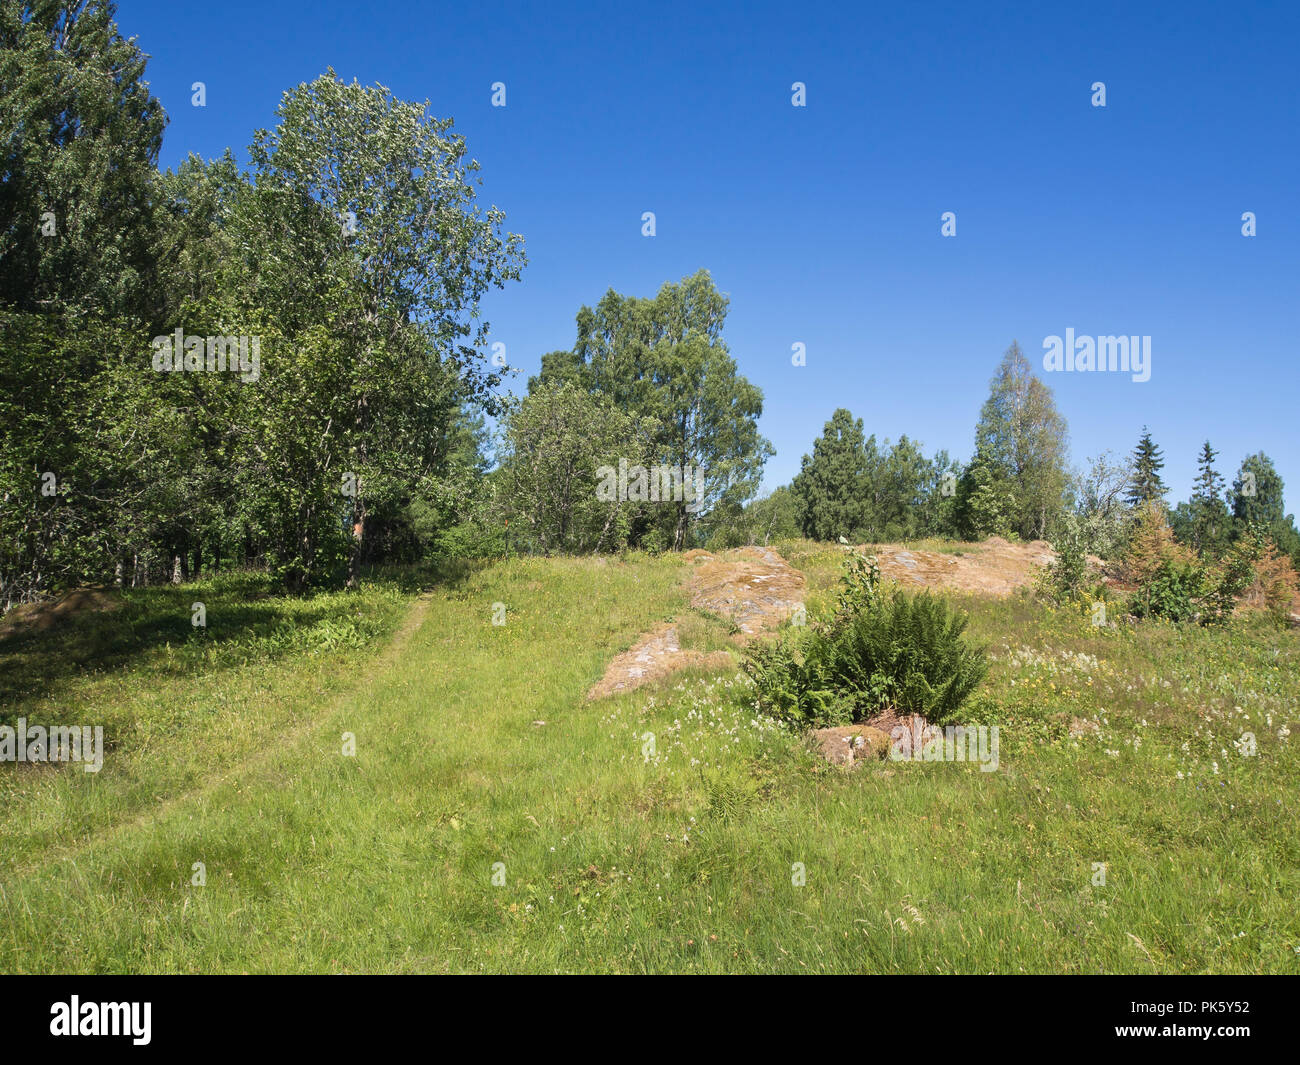 Glaskogen nature reserve in Värmland Sweden, a vast forest area  ideal for hikers, footpath crossing a hill Stock Photo